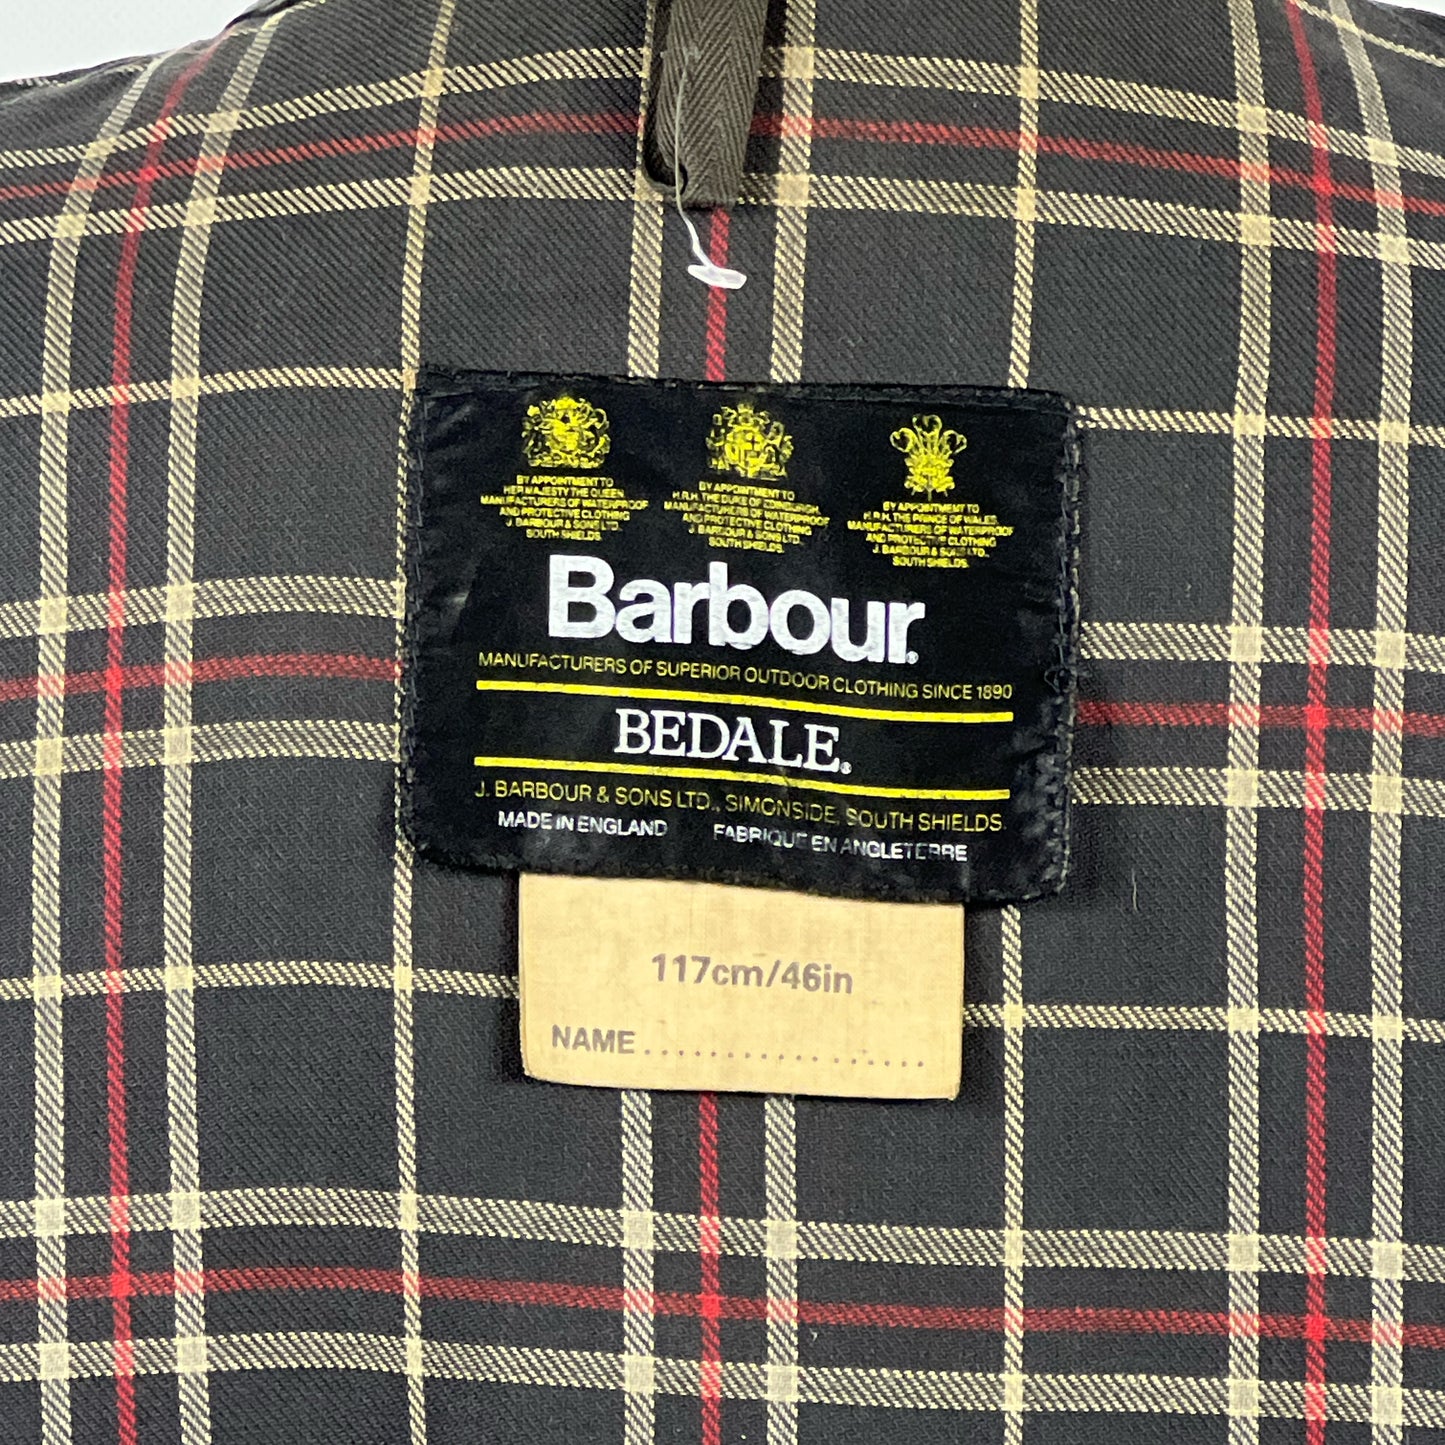 Barbour Giacca Bedale Uomo Vintage Blu C46/117cm Bedale waxed jacket Size XL